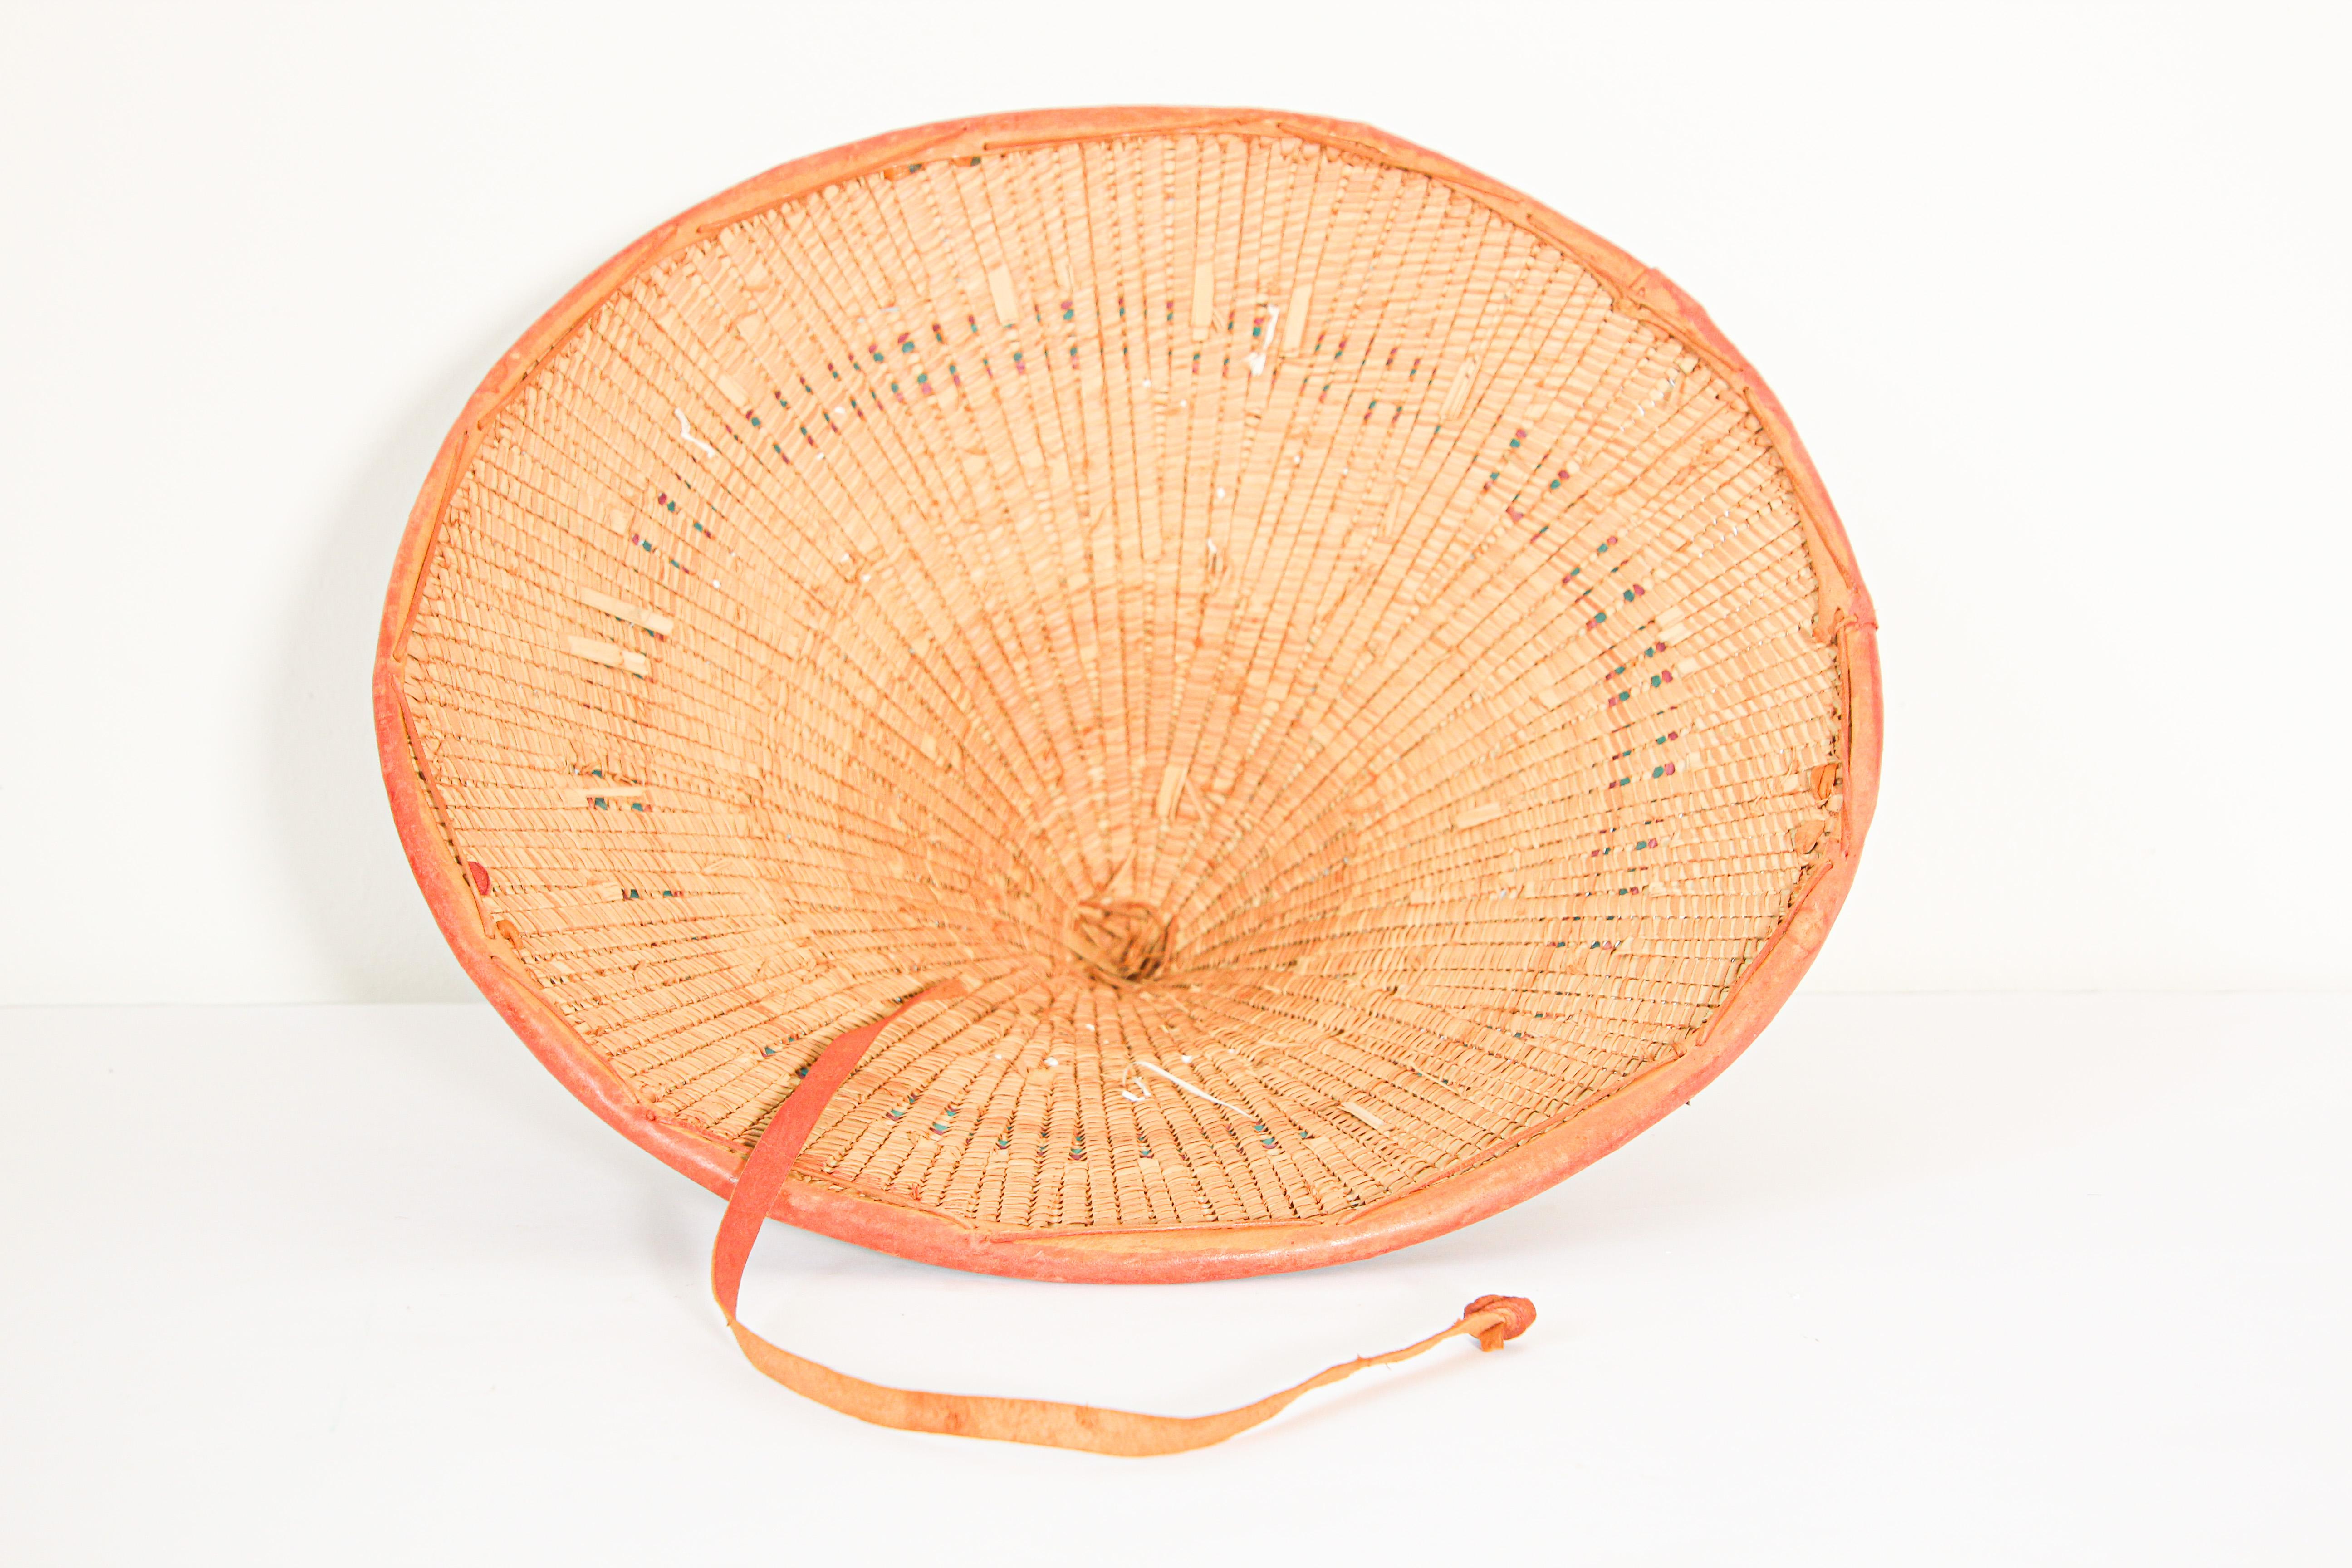 20th Century Conical Leather and Straw Tribal Fulani Hat, Mali West Africa For Sale